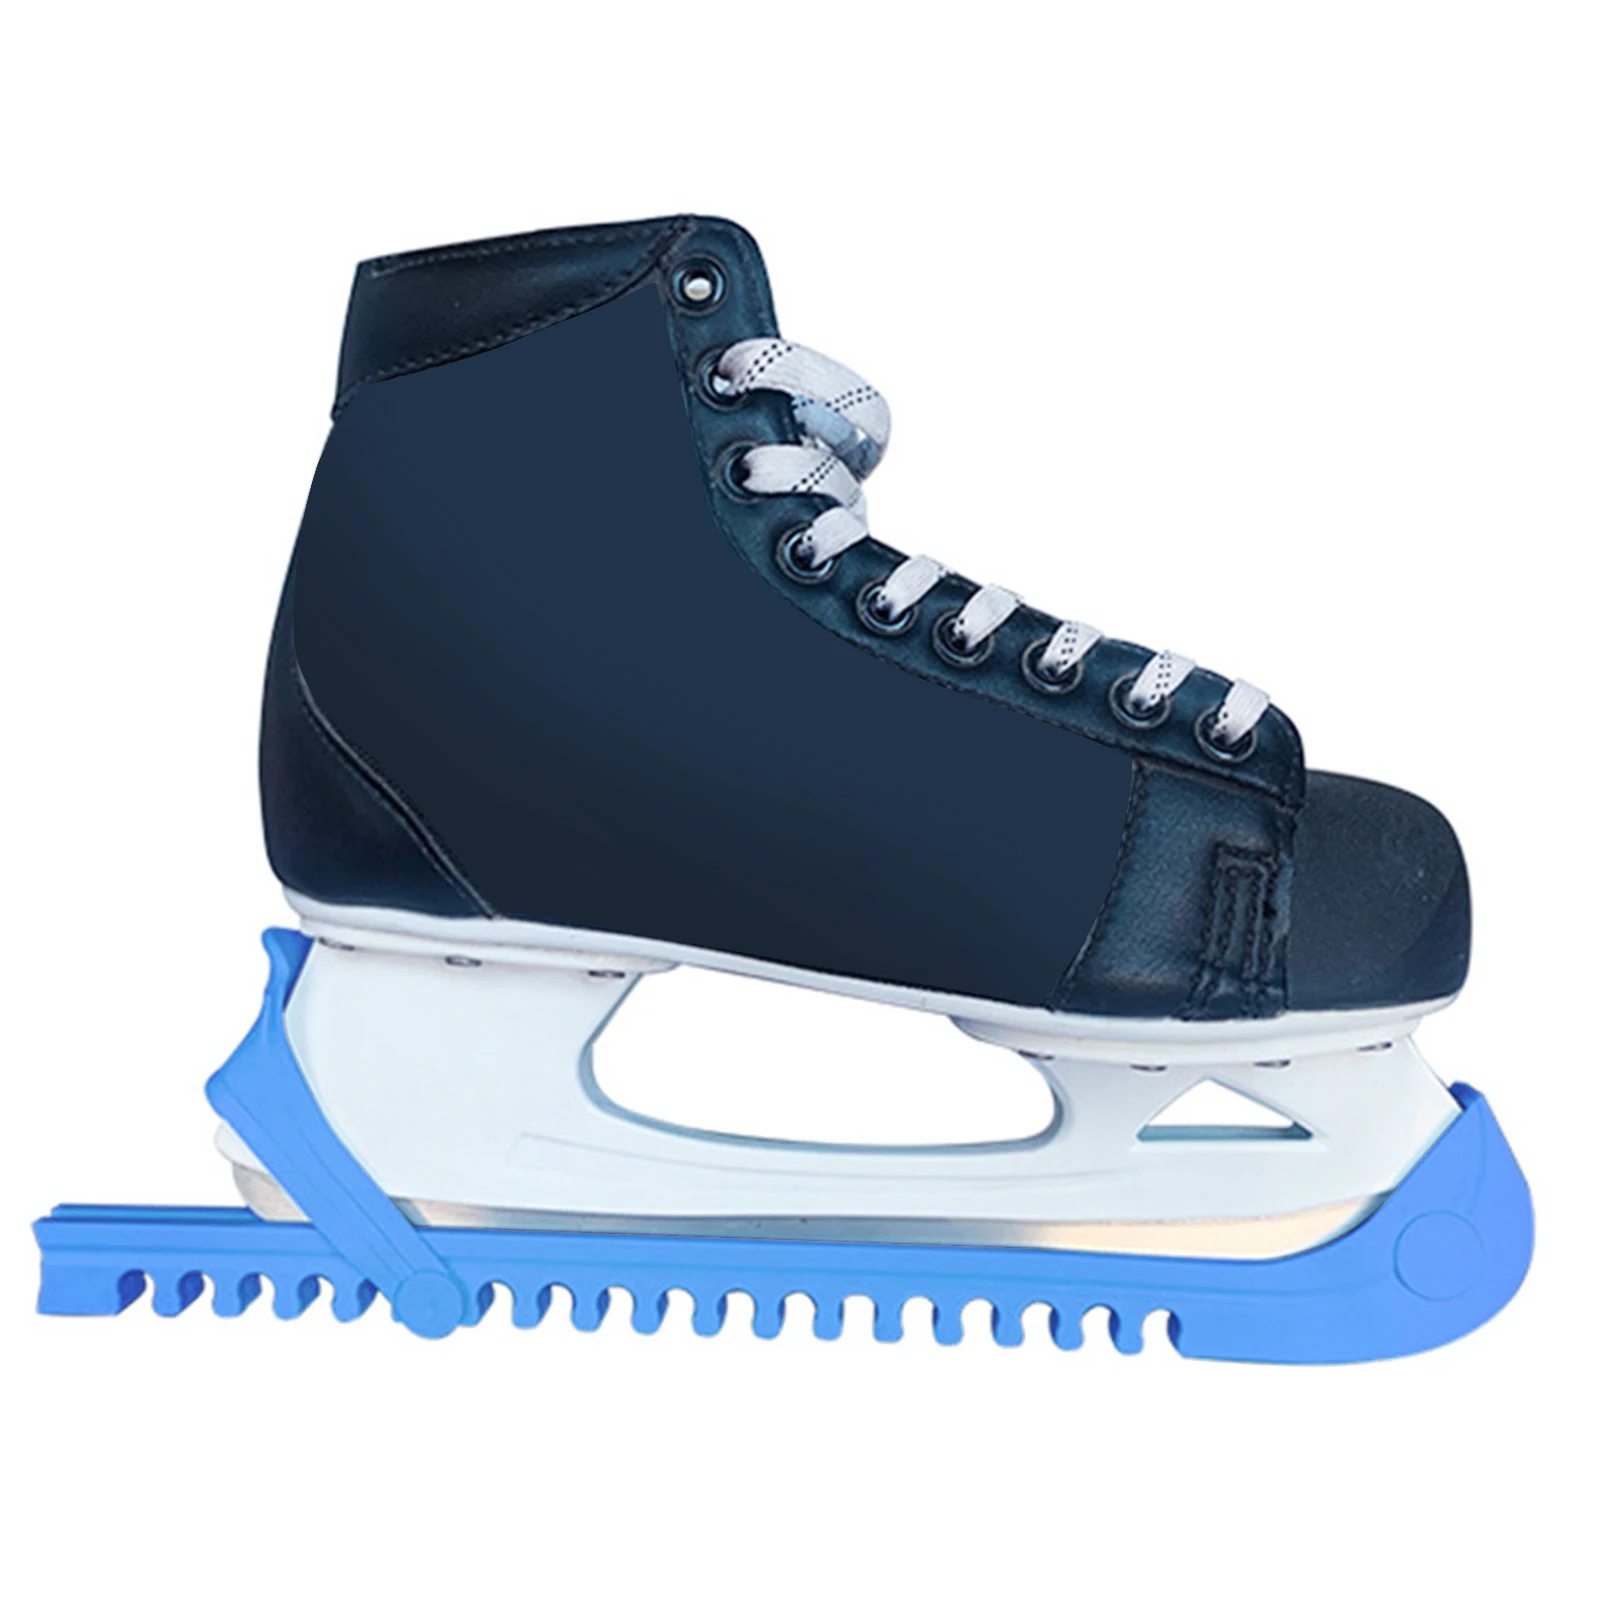 Adjustable Ice Hockey Figure Skate Blade Cover Ice Skate Blade Guards Protection Adjustable Straps, Custom Fit for Kids Adults